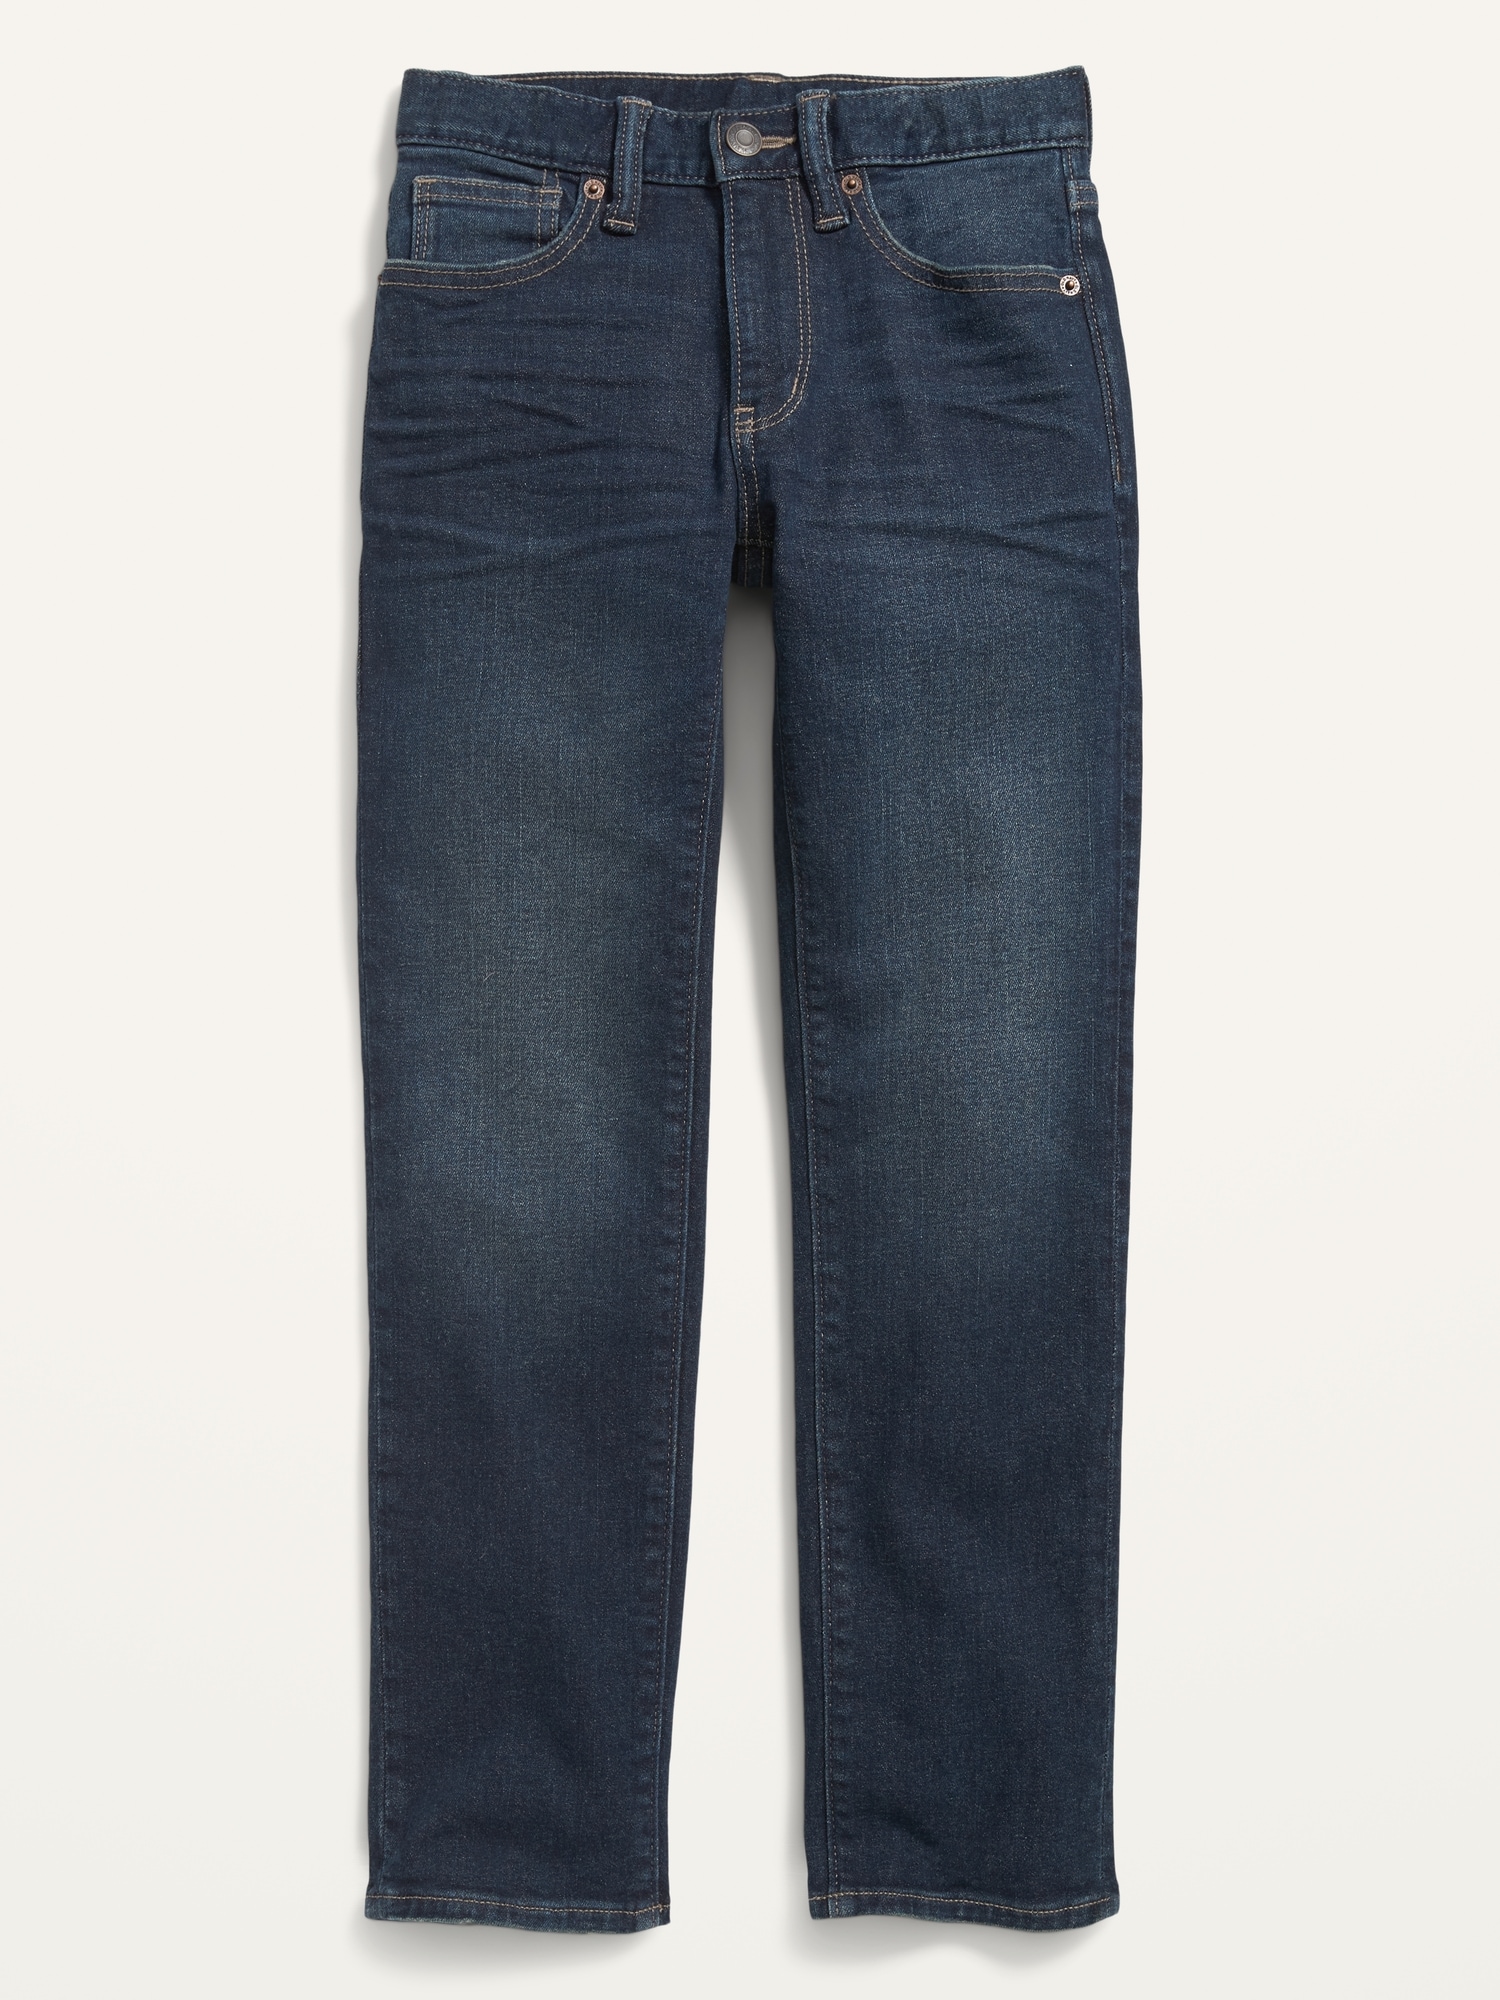 Jeans Old Boys | for Navy Skinny